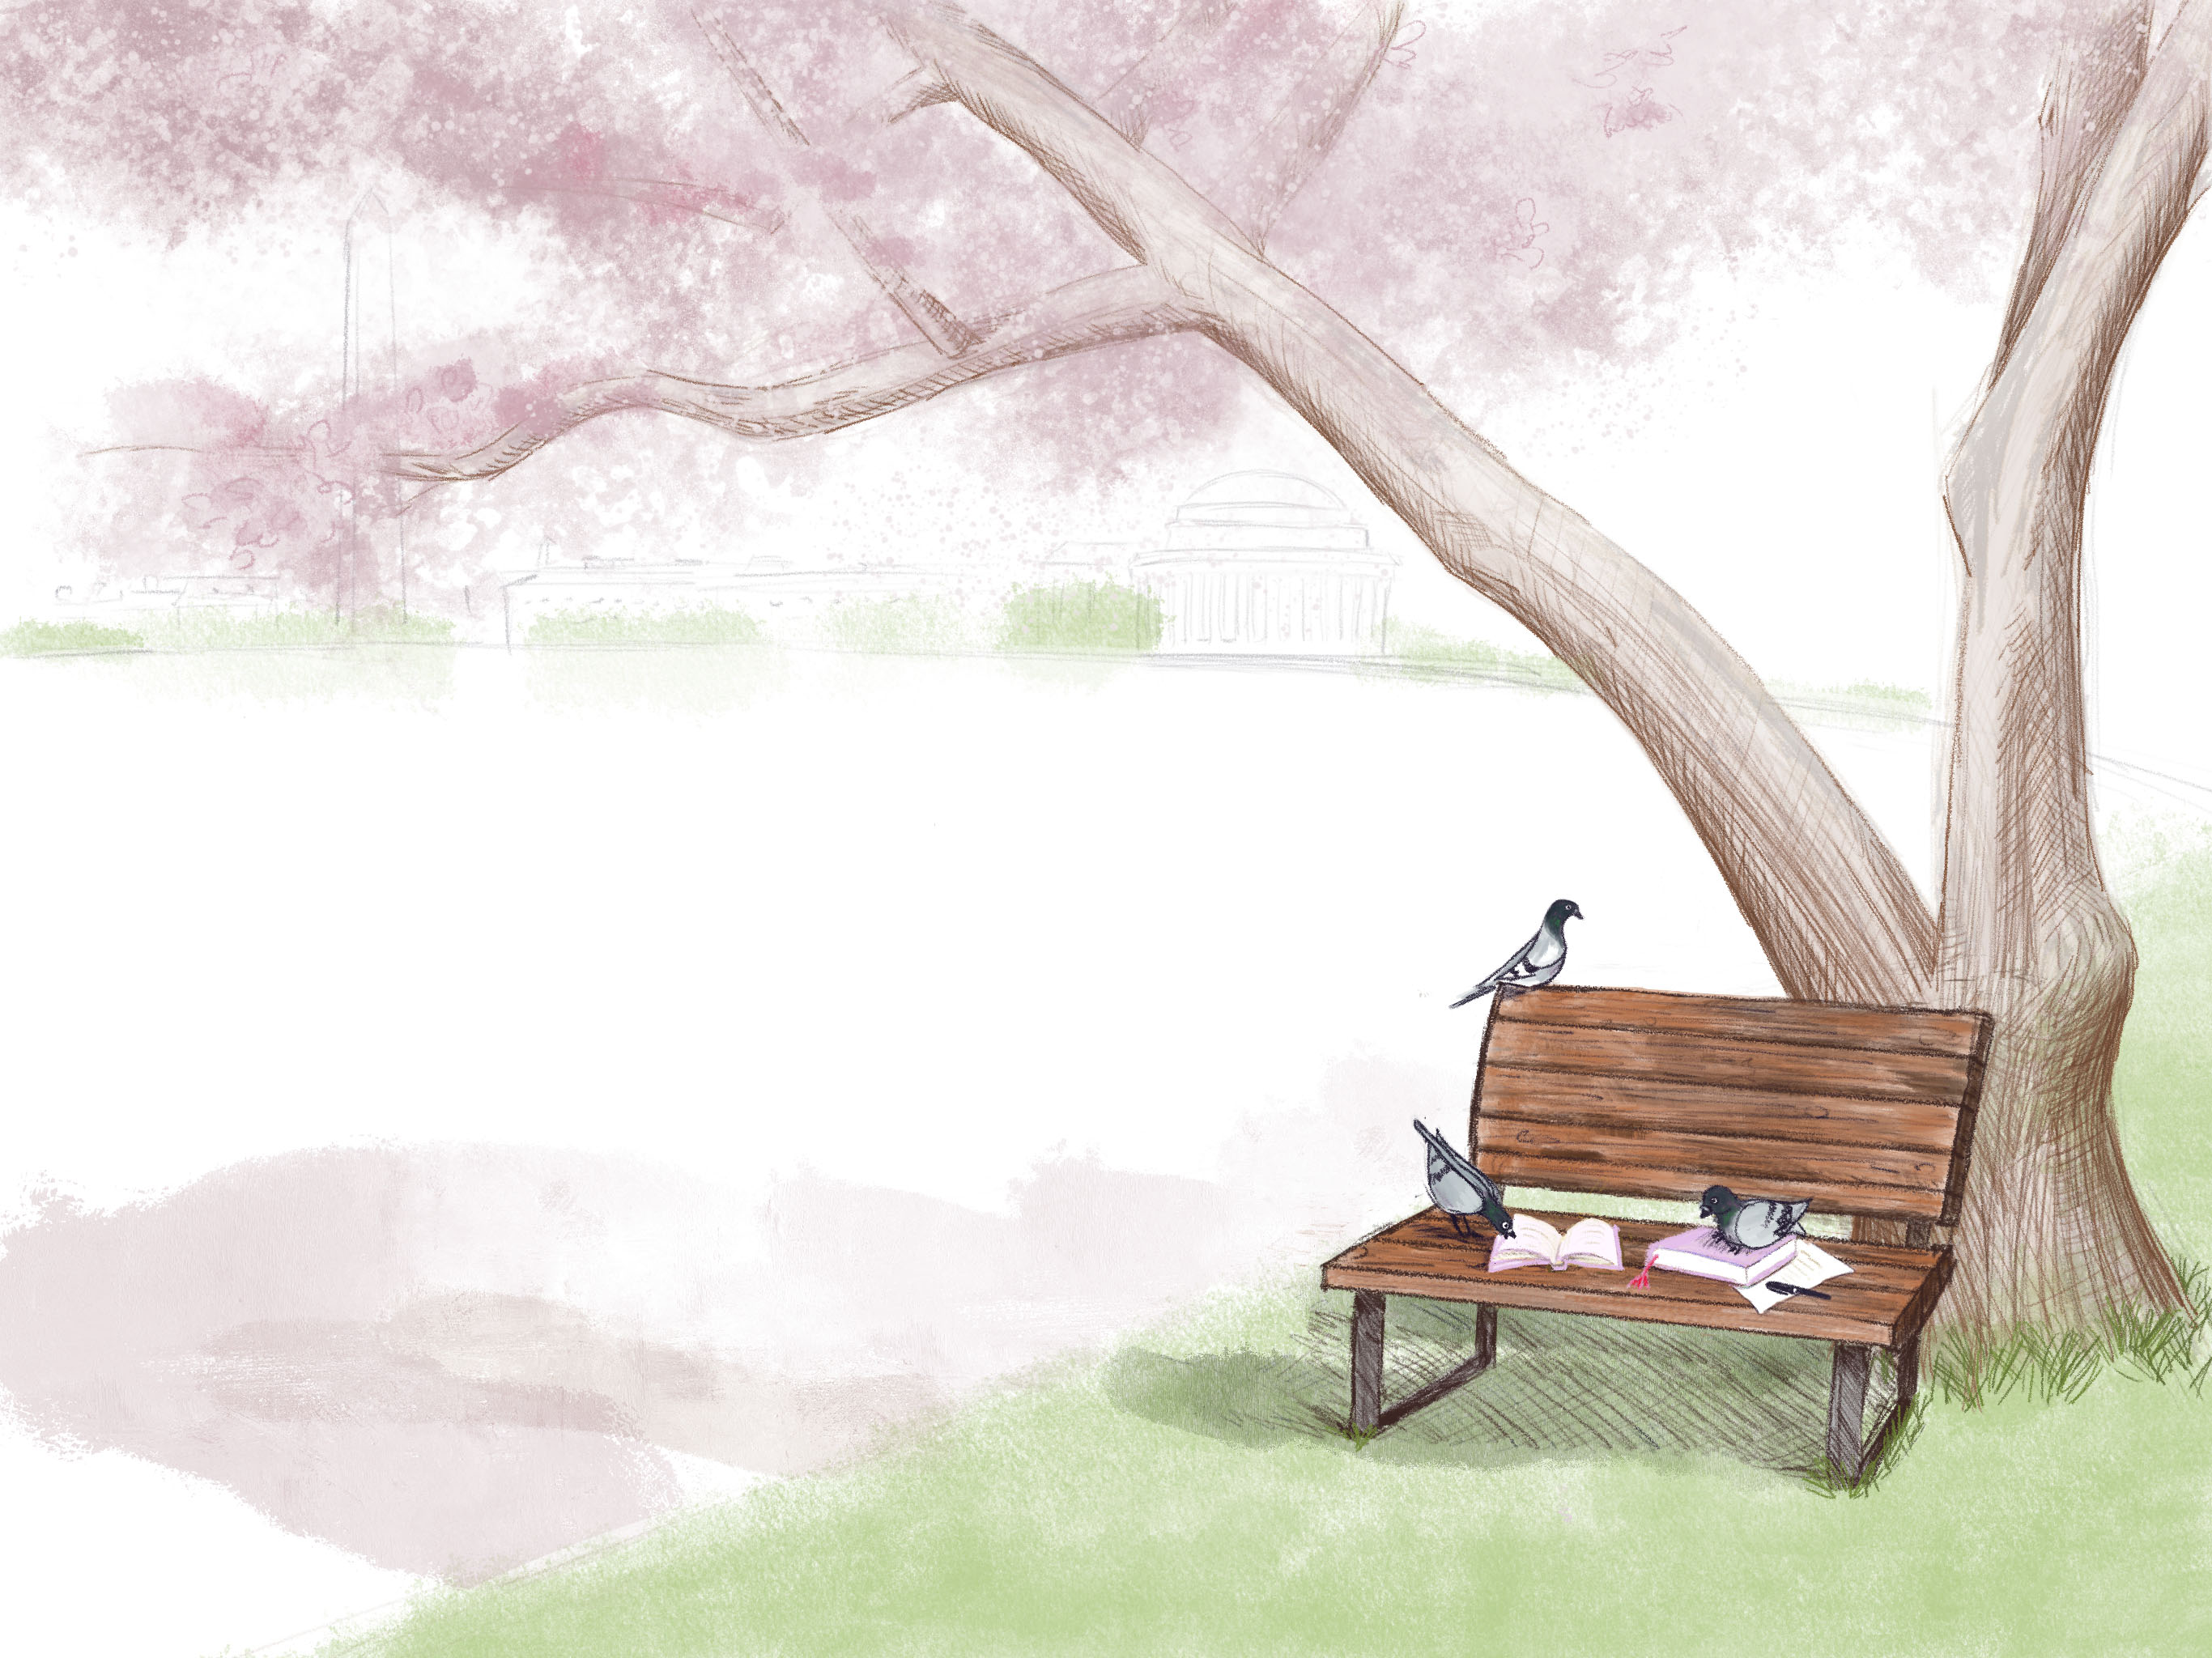 hand-drawn, simplified, brightly colored illustration of a bench with books and pigeons under a cherry blossom tree in bloom with the DC skyline in background